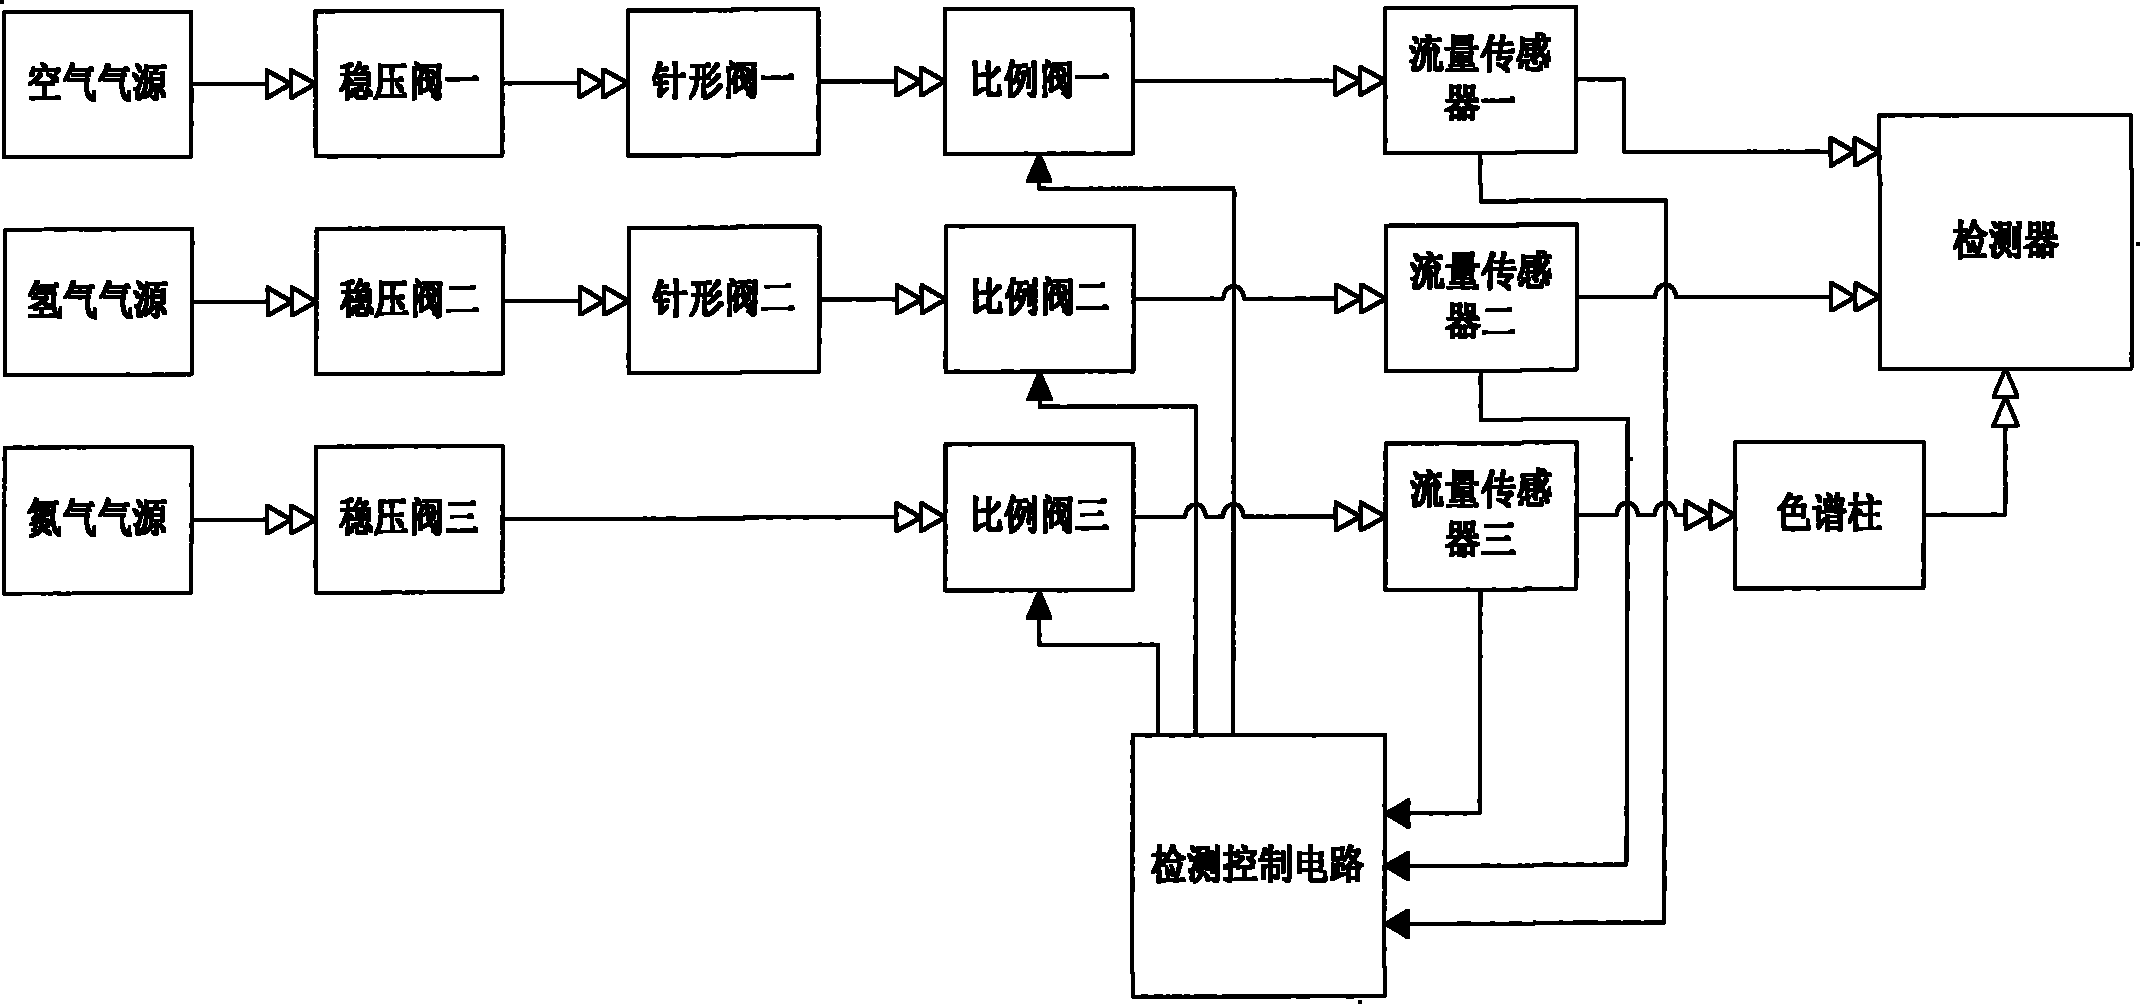 Automatic regulating device for flow pressure of gas chromatograph